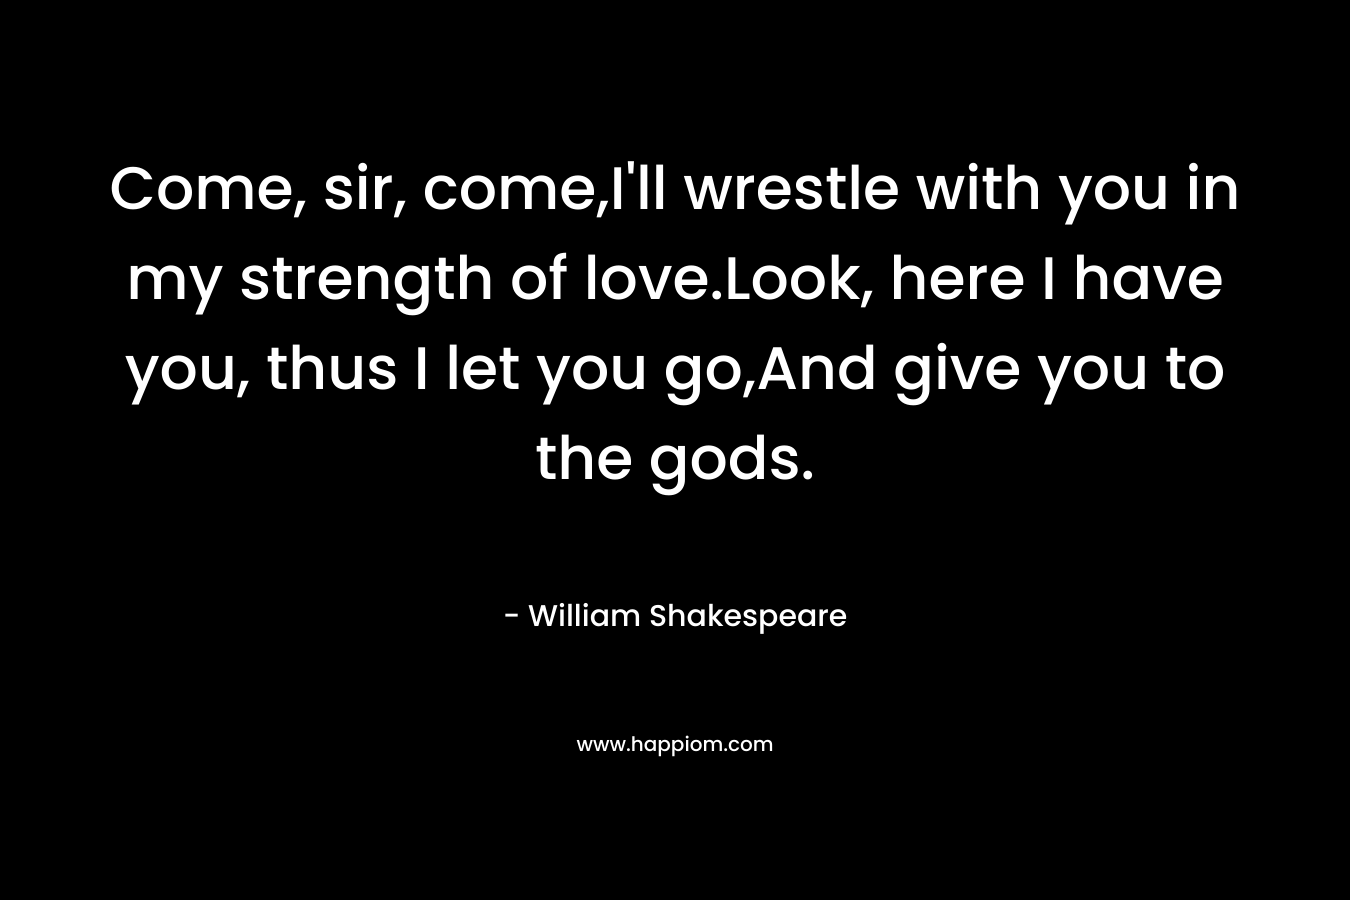 Come, sir, come,I'll wrestle with you in my strength of love.Look, here I have you, thus I let you go,And give you to the gods.